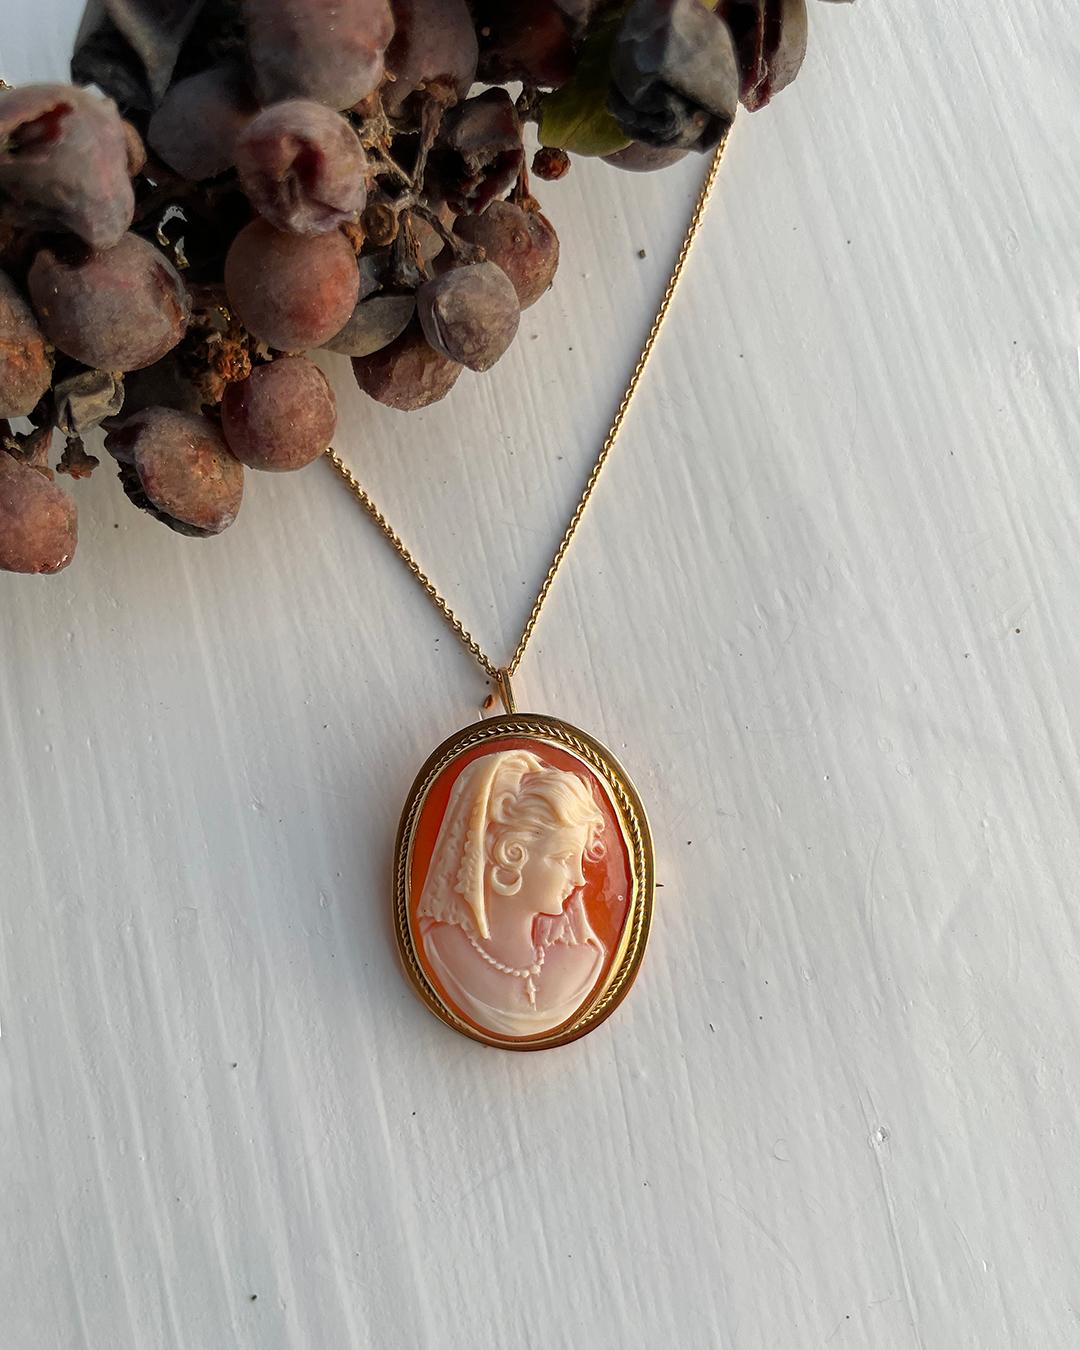 There is something so magical to me about vintage and antique cameos: the way the portraits are rendered in such incredible detail seems to tell a person's mystery. This cameo is carved from genuine shell with such impressive precision, and it's set